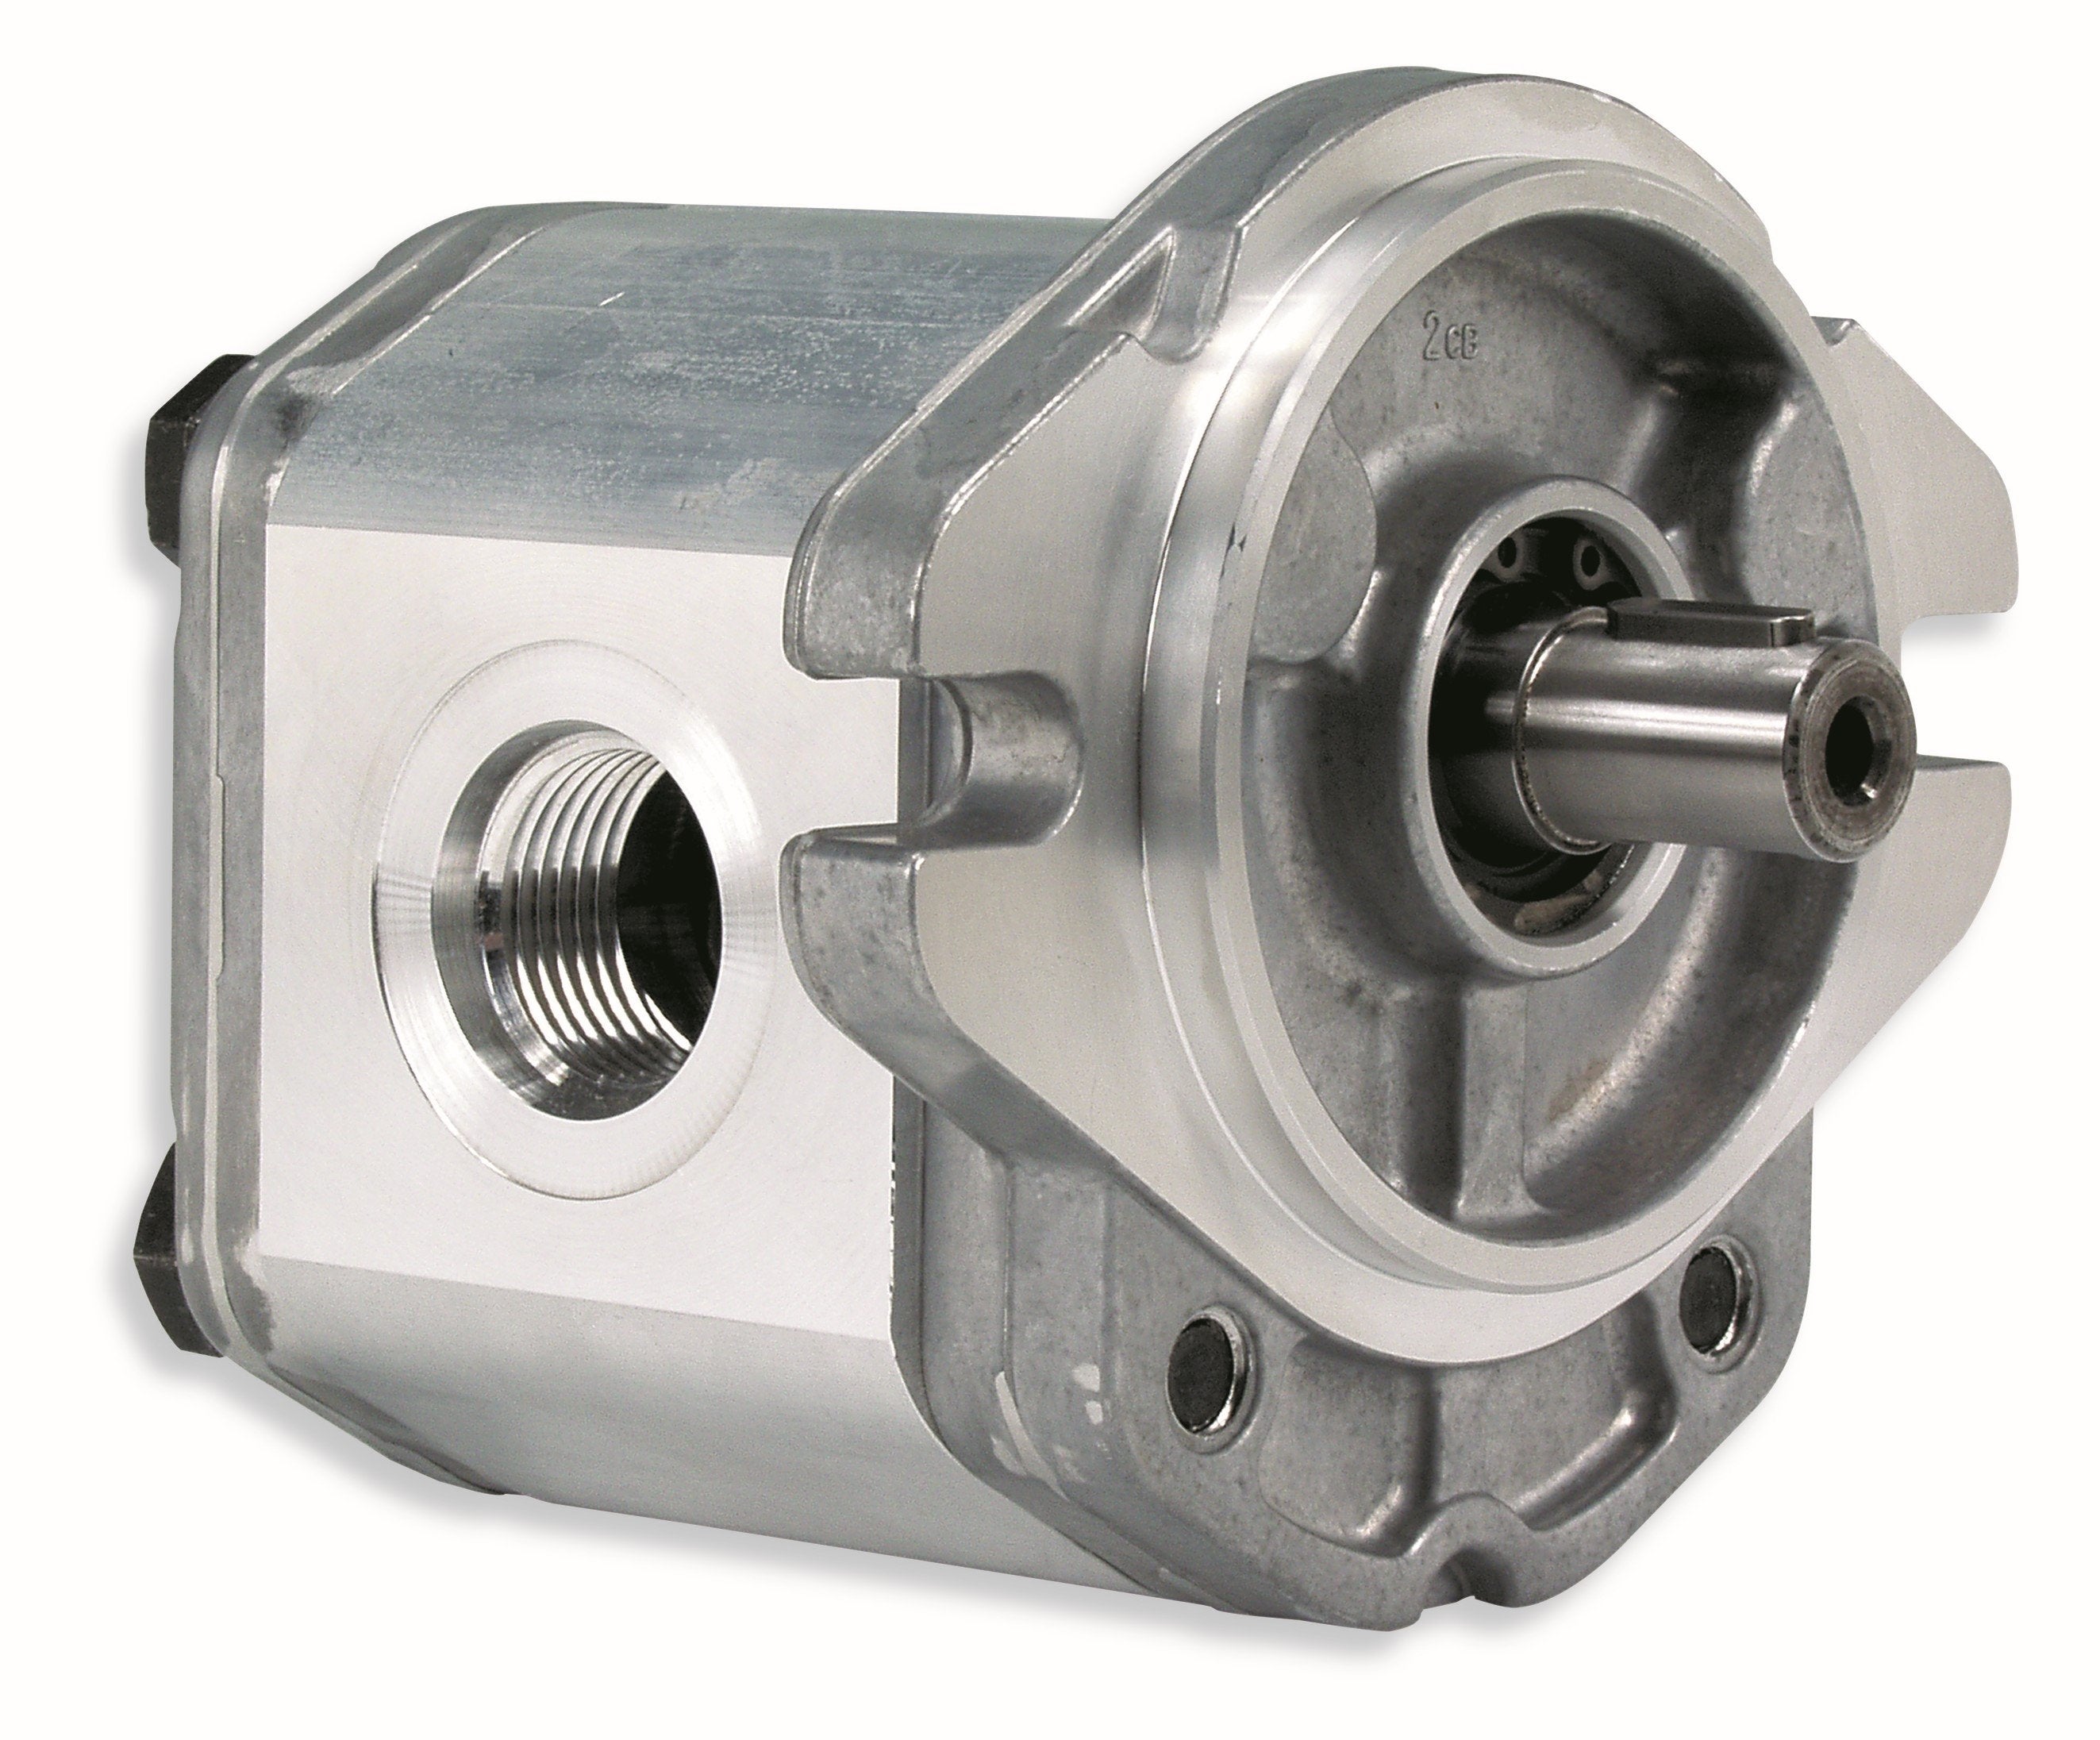 GHM2A-R-16-S1-E2 : Marzocchi Gear Motor, Bidirectional, 11.5cc, 4060psi rated, 4000RPM, 0.75 (3/4") #12 SAE ports, 9T 16/32DP Splined Shaft